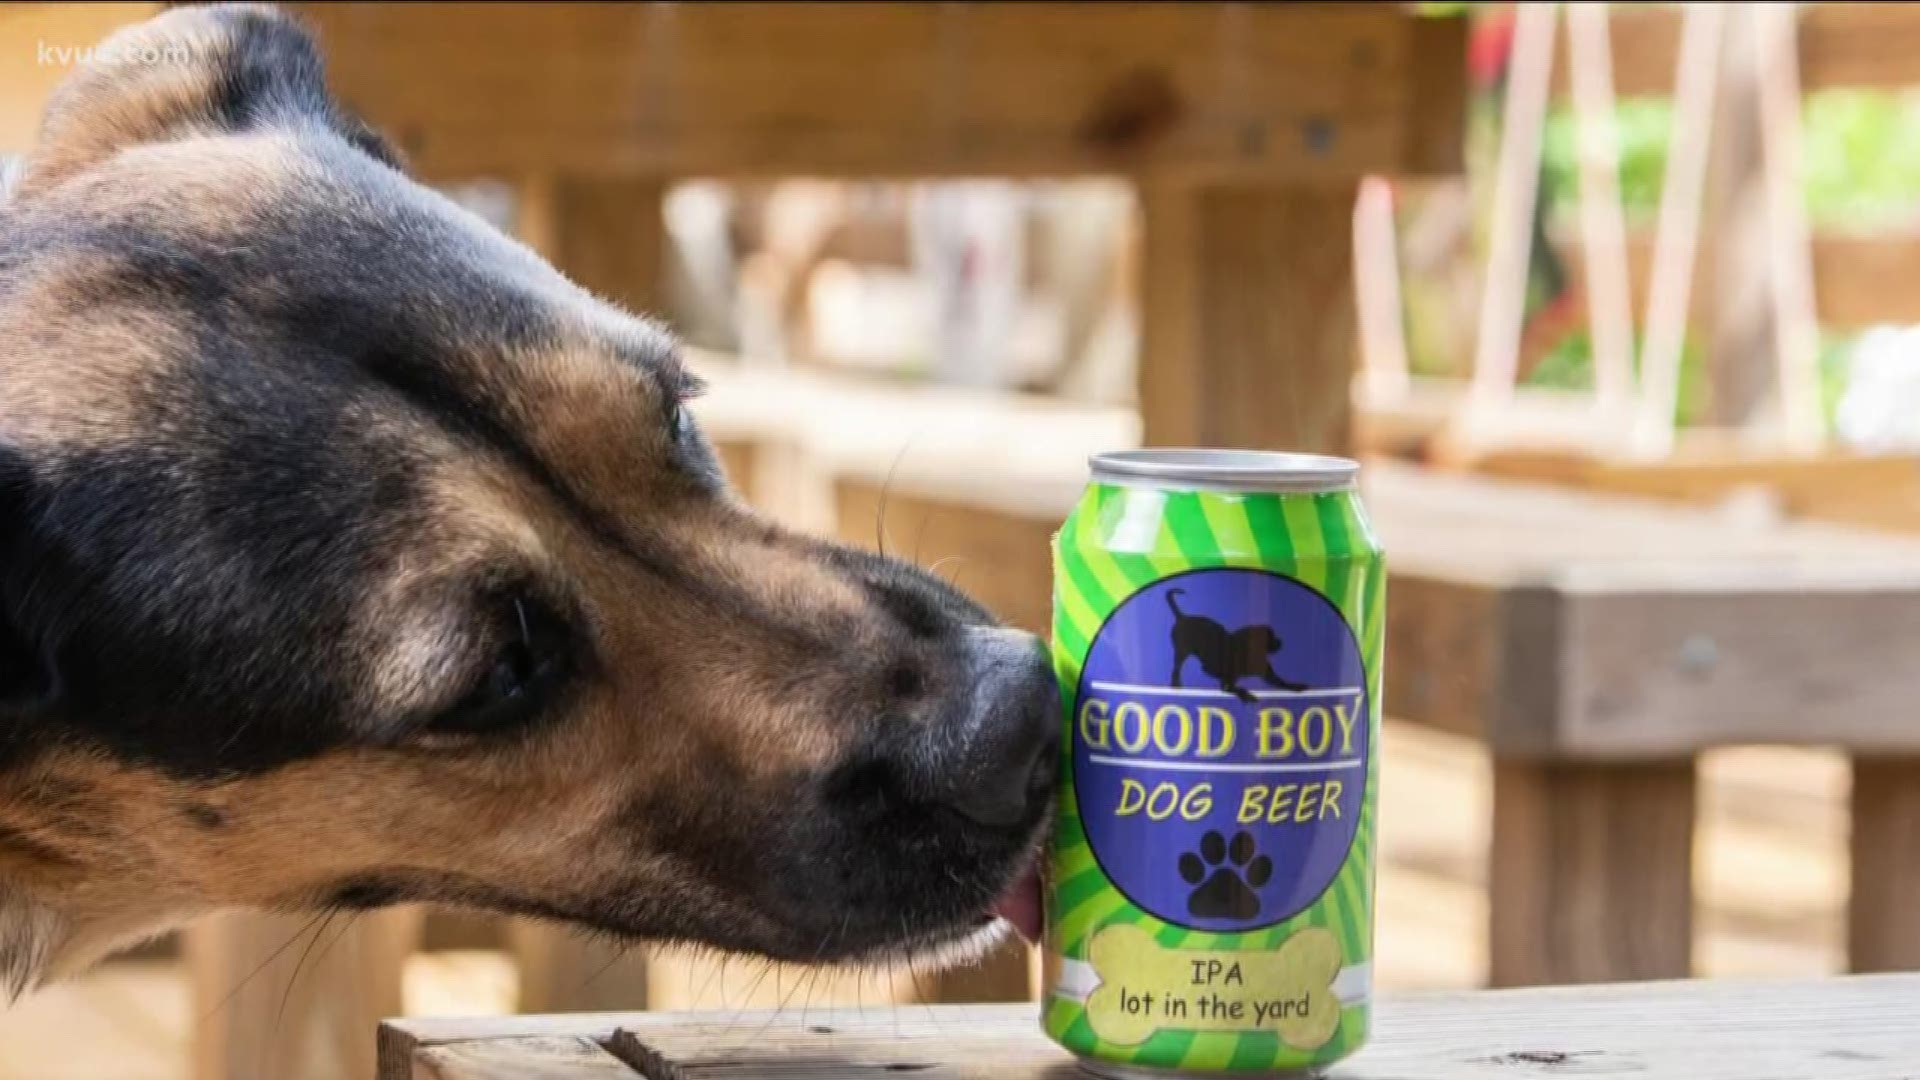 You can now ick back and have a beer with your dog thanks to a couple from Houston.